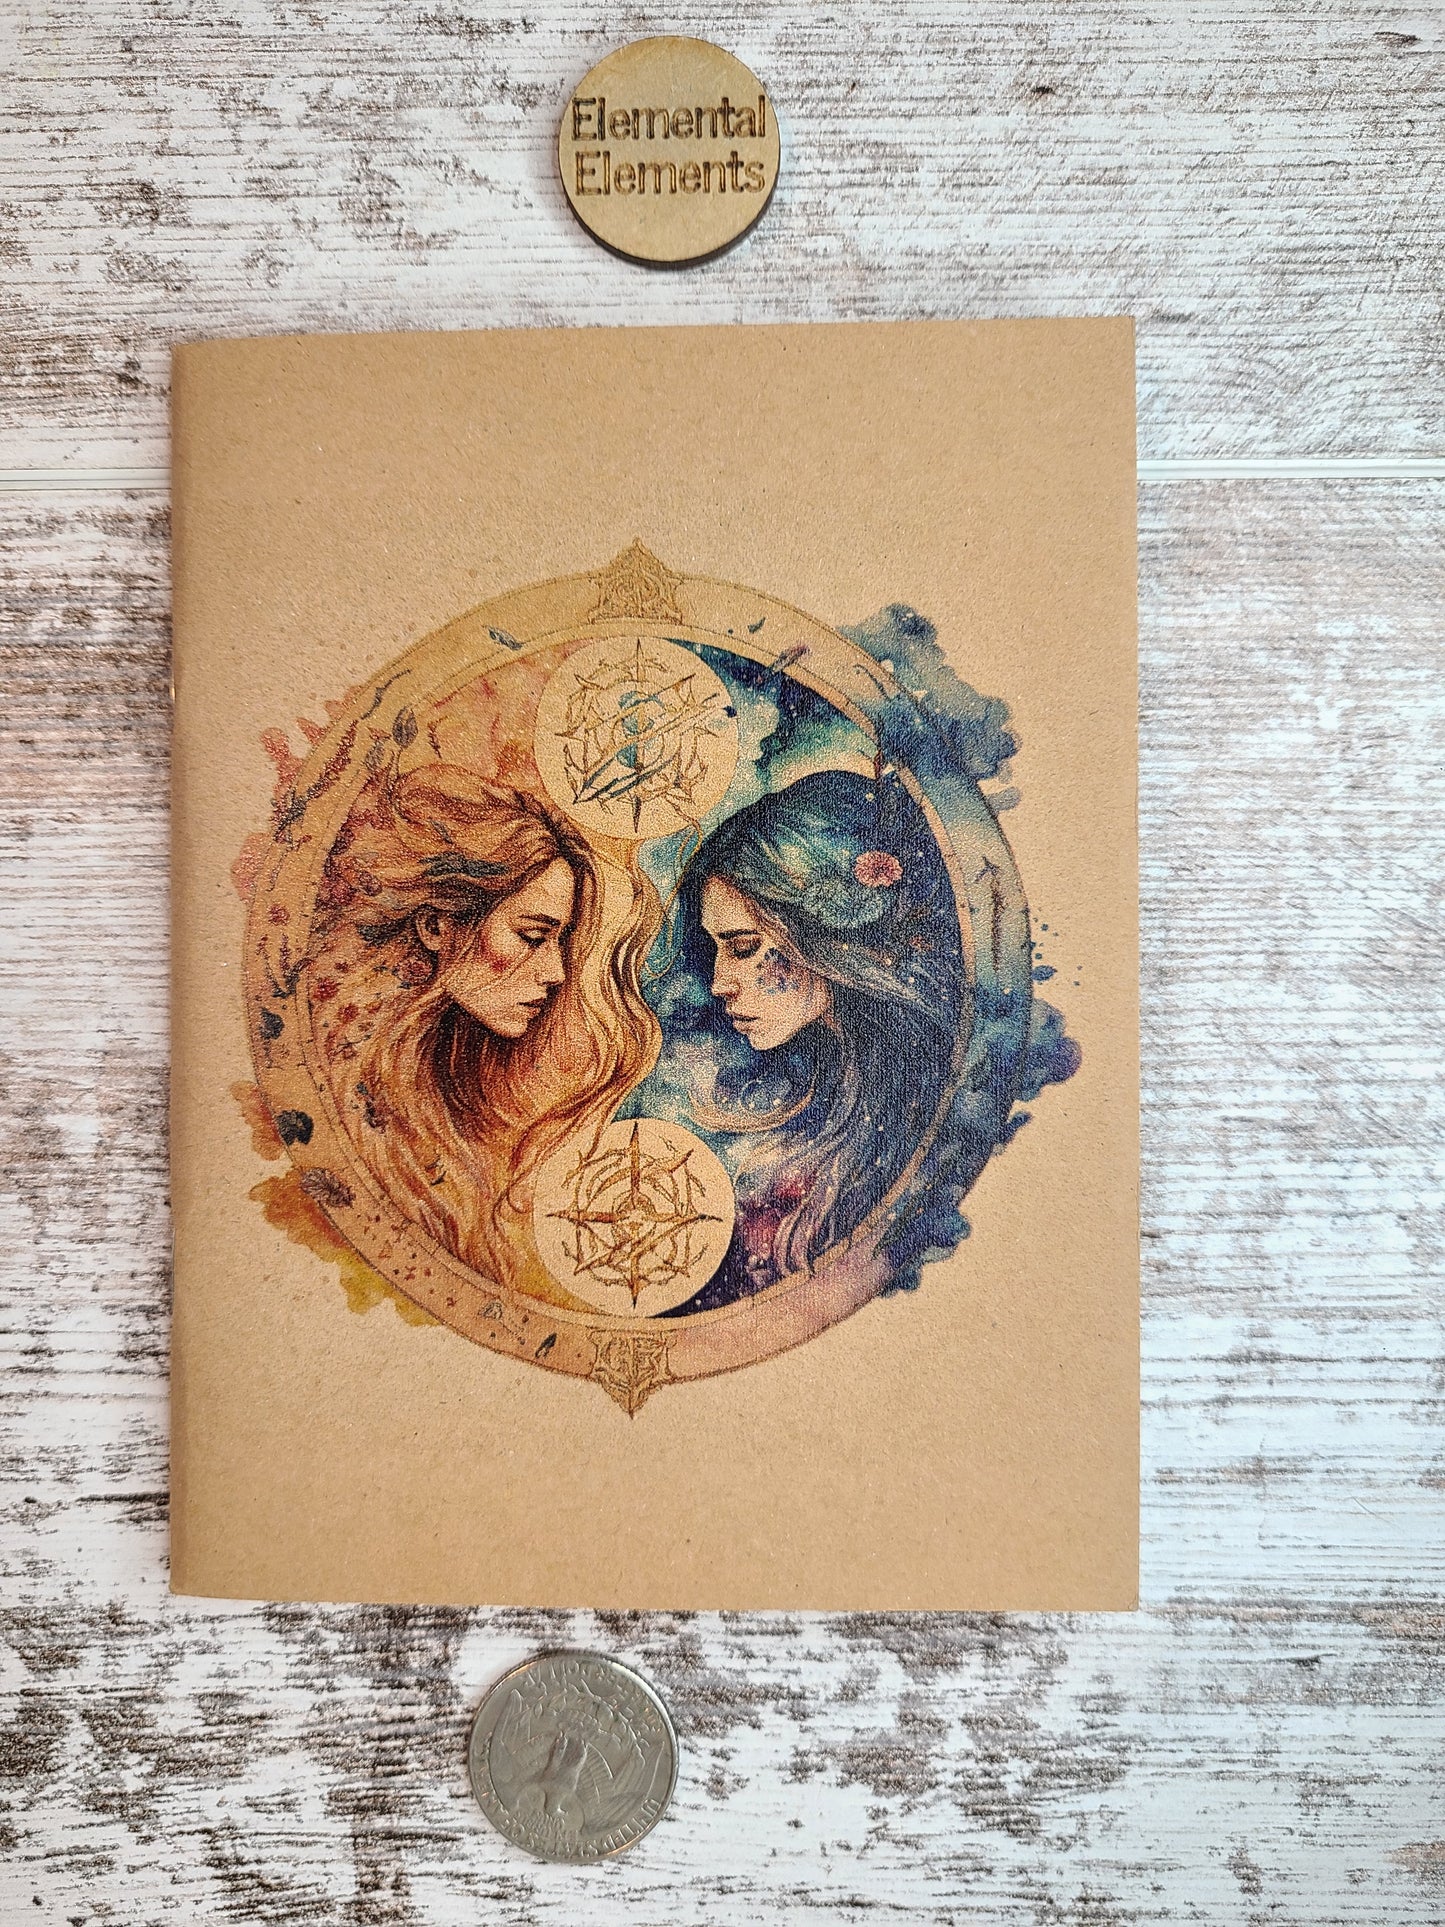 Gemini journal two humans with long hair facing each other. The left person is red and orange. The right person is blue and green. They both have flowing long hair surrounded by a circle with associated colors peeking out like clouds on each side. 